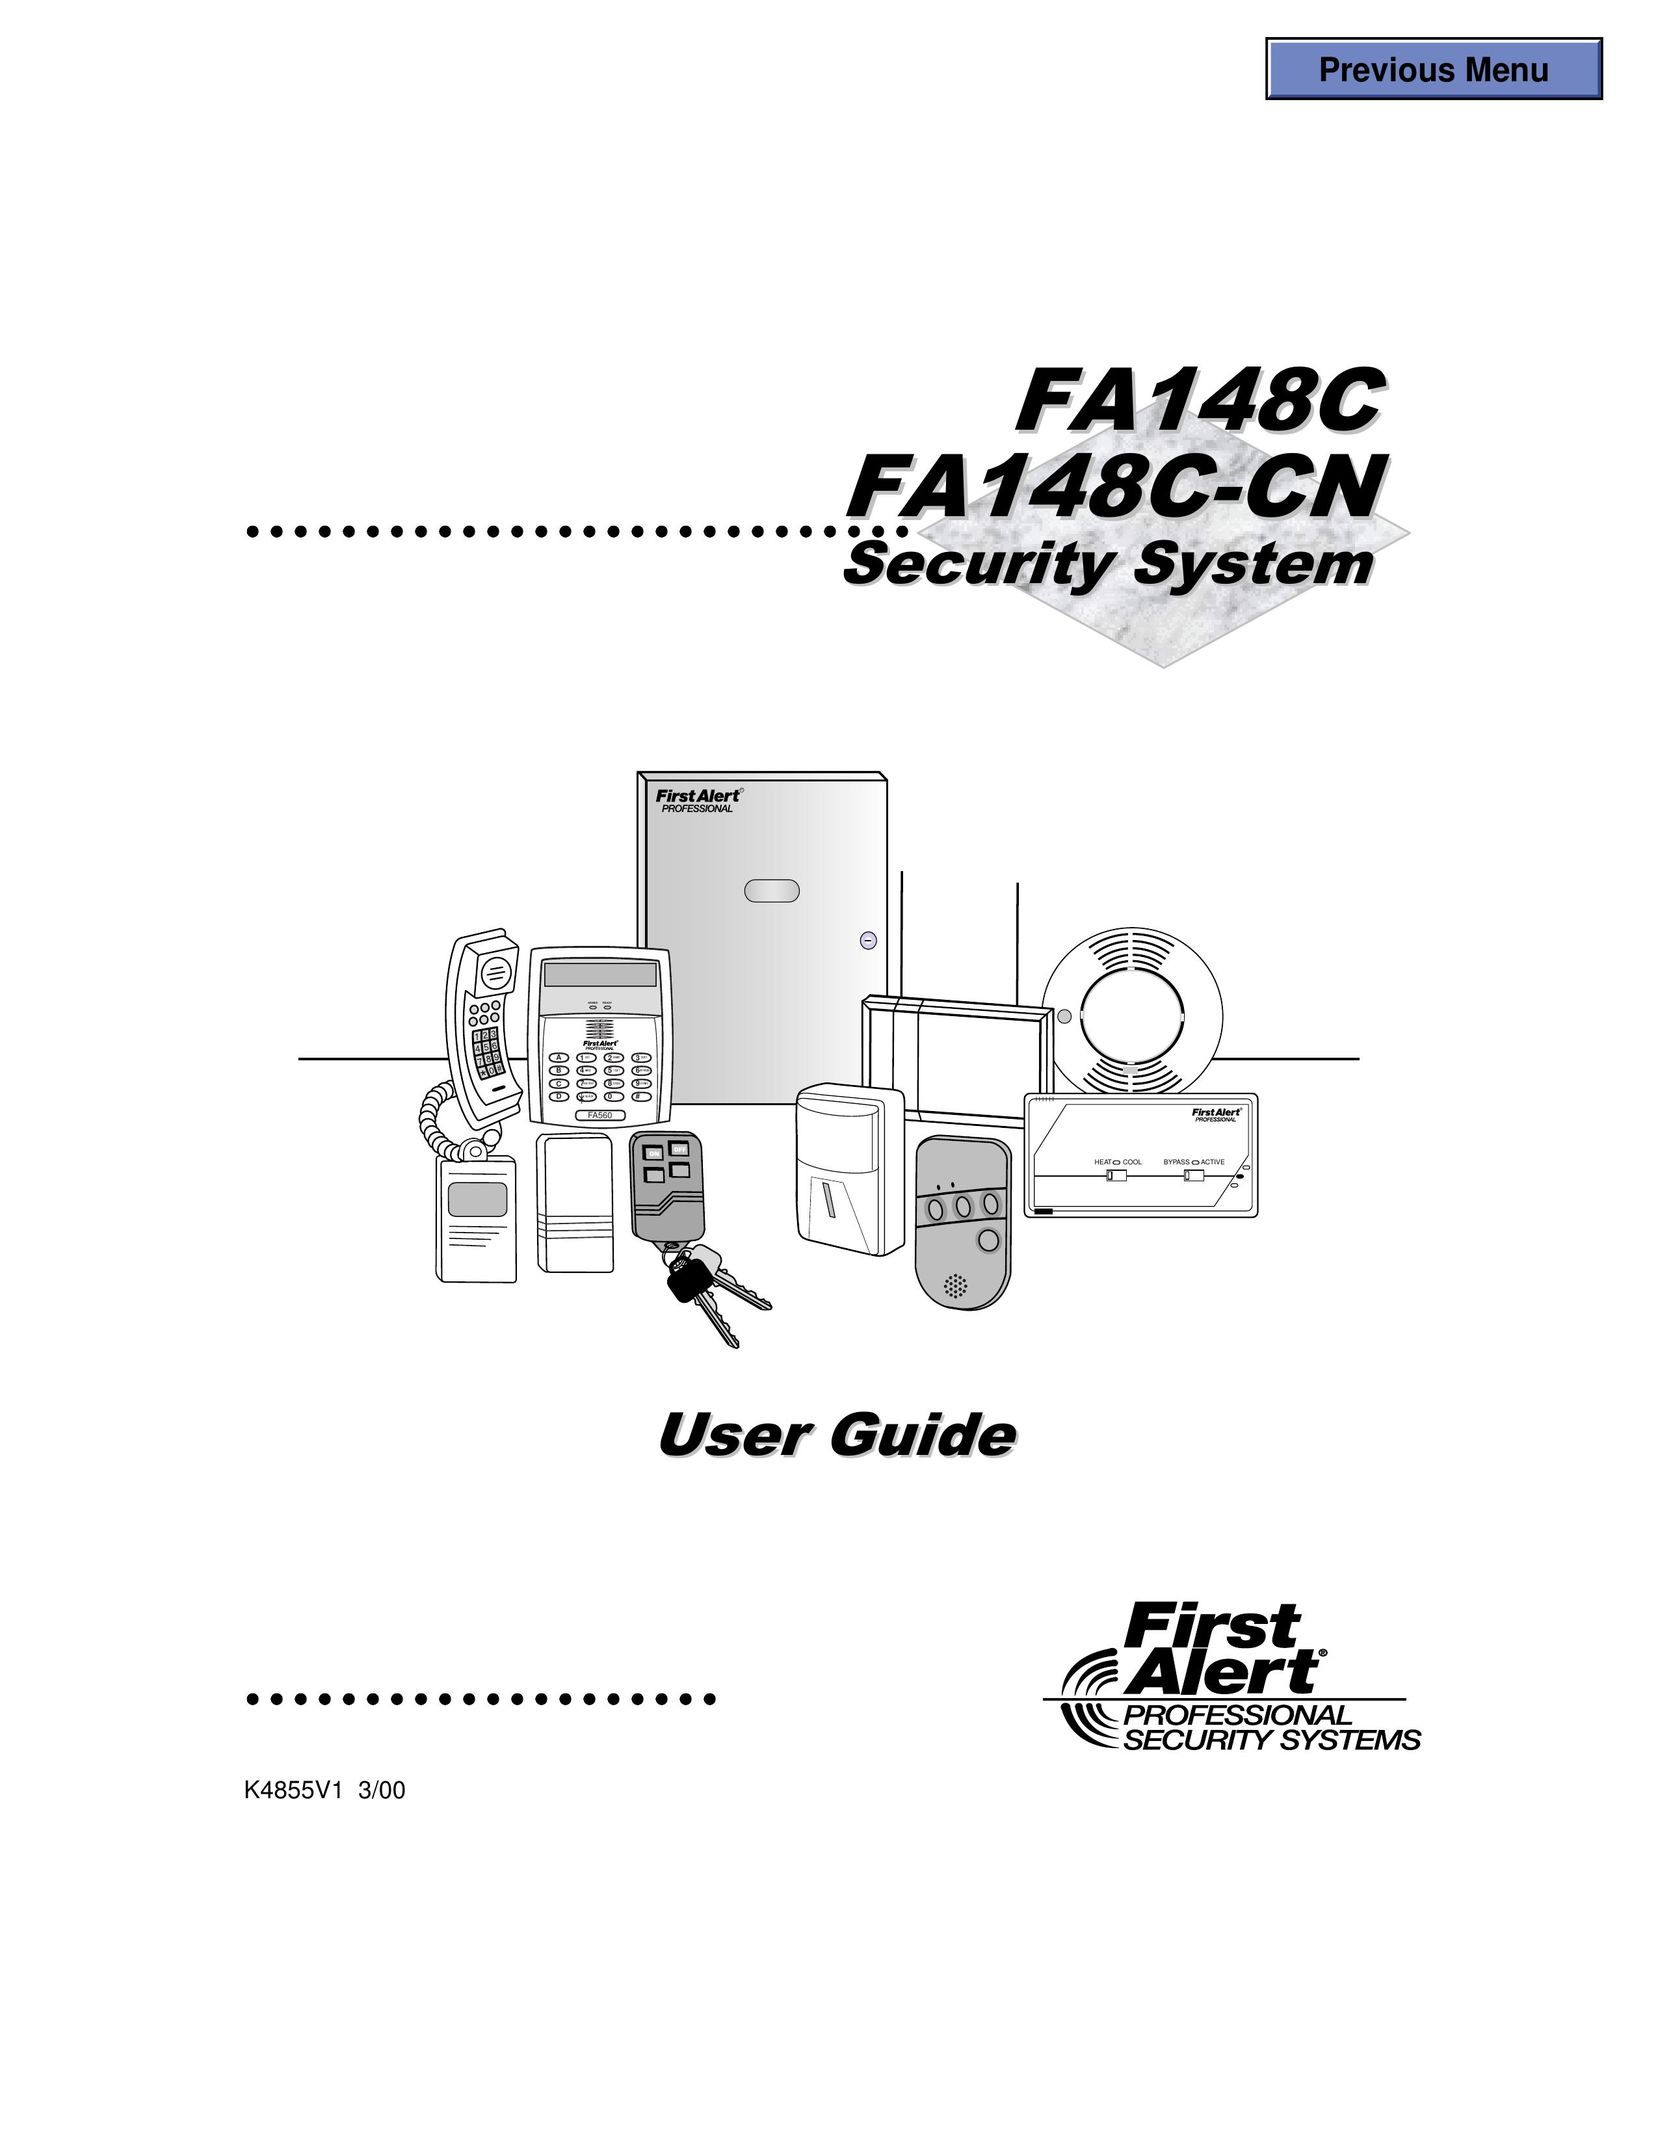 First Alert FA-148C-CN Home Security System User Manual